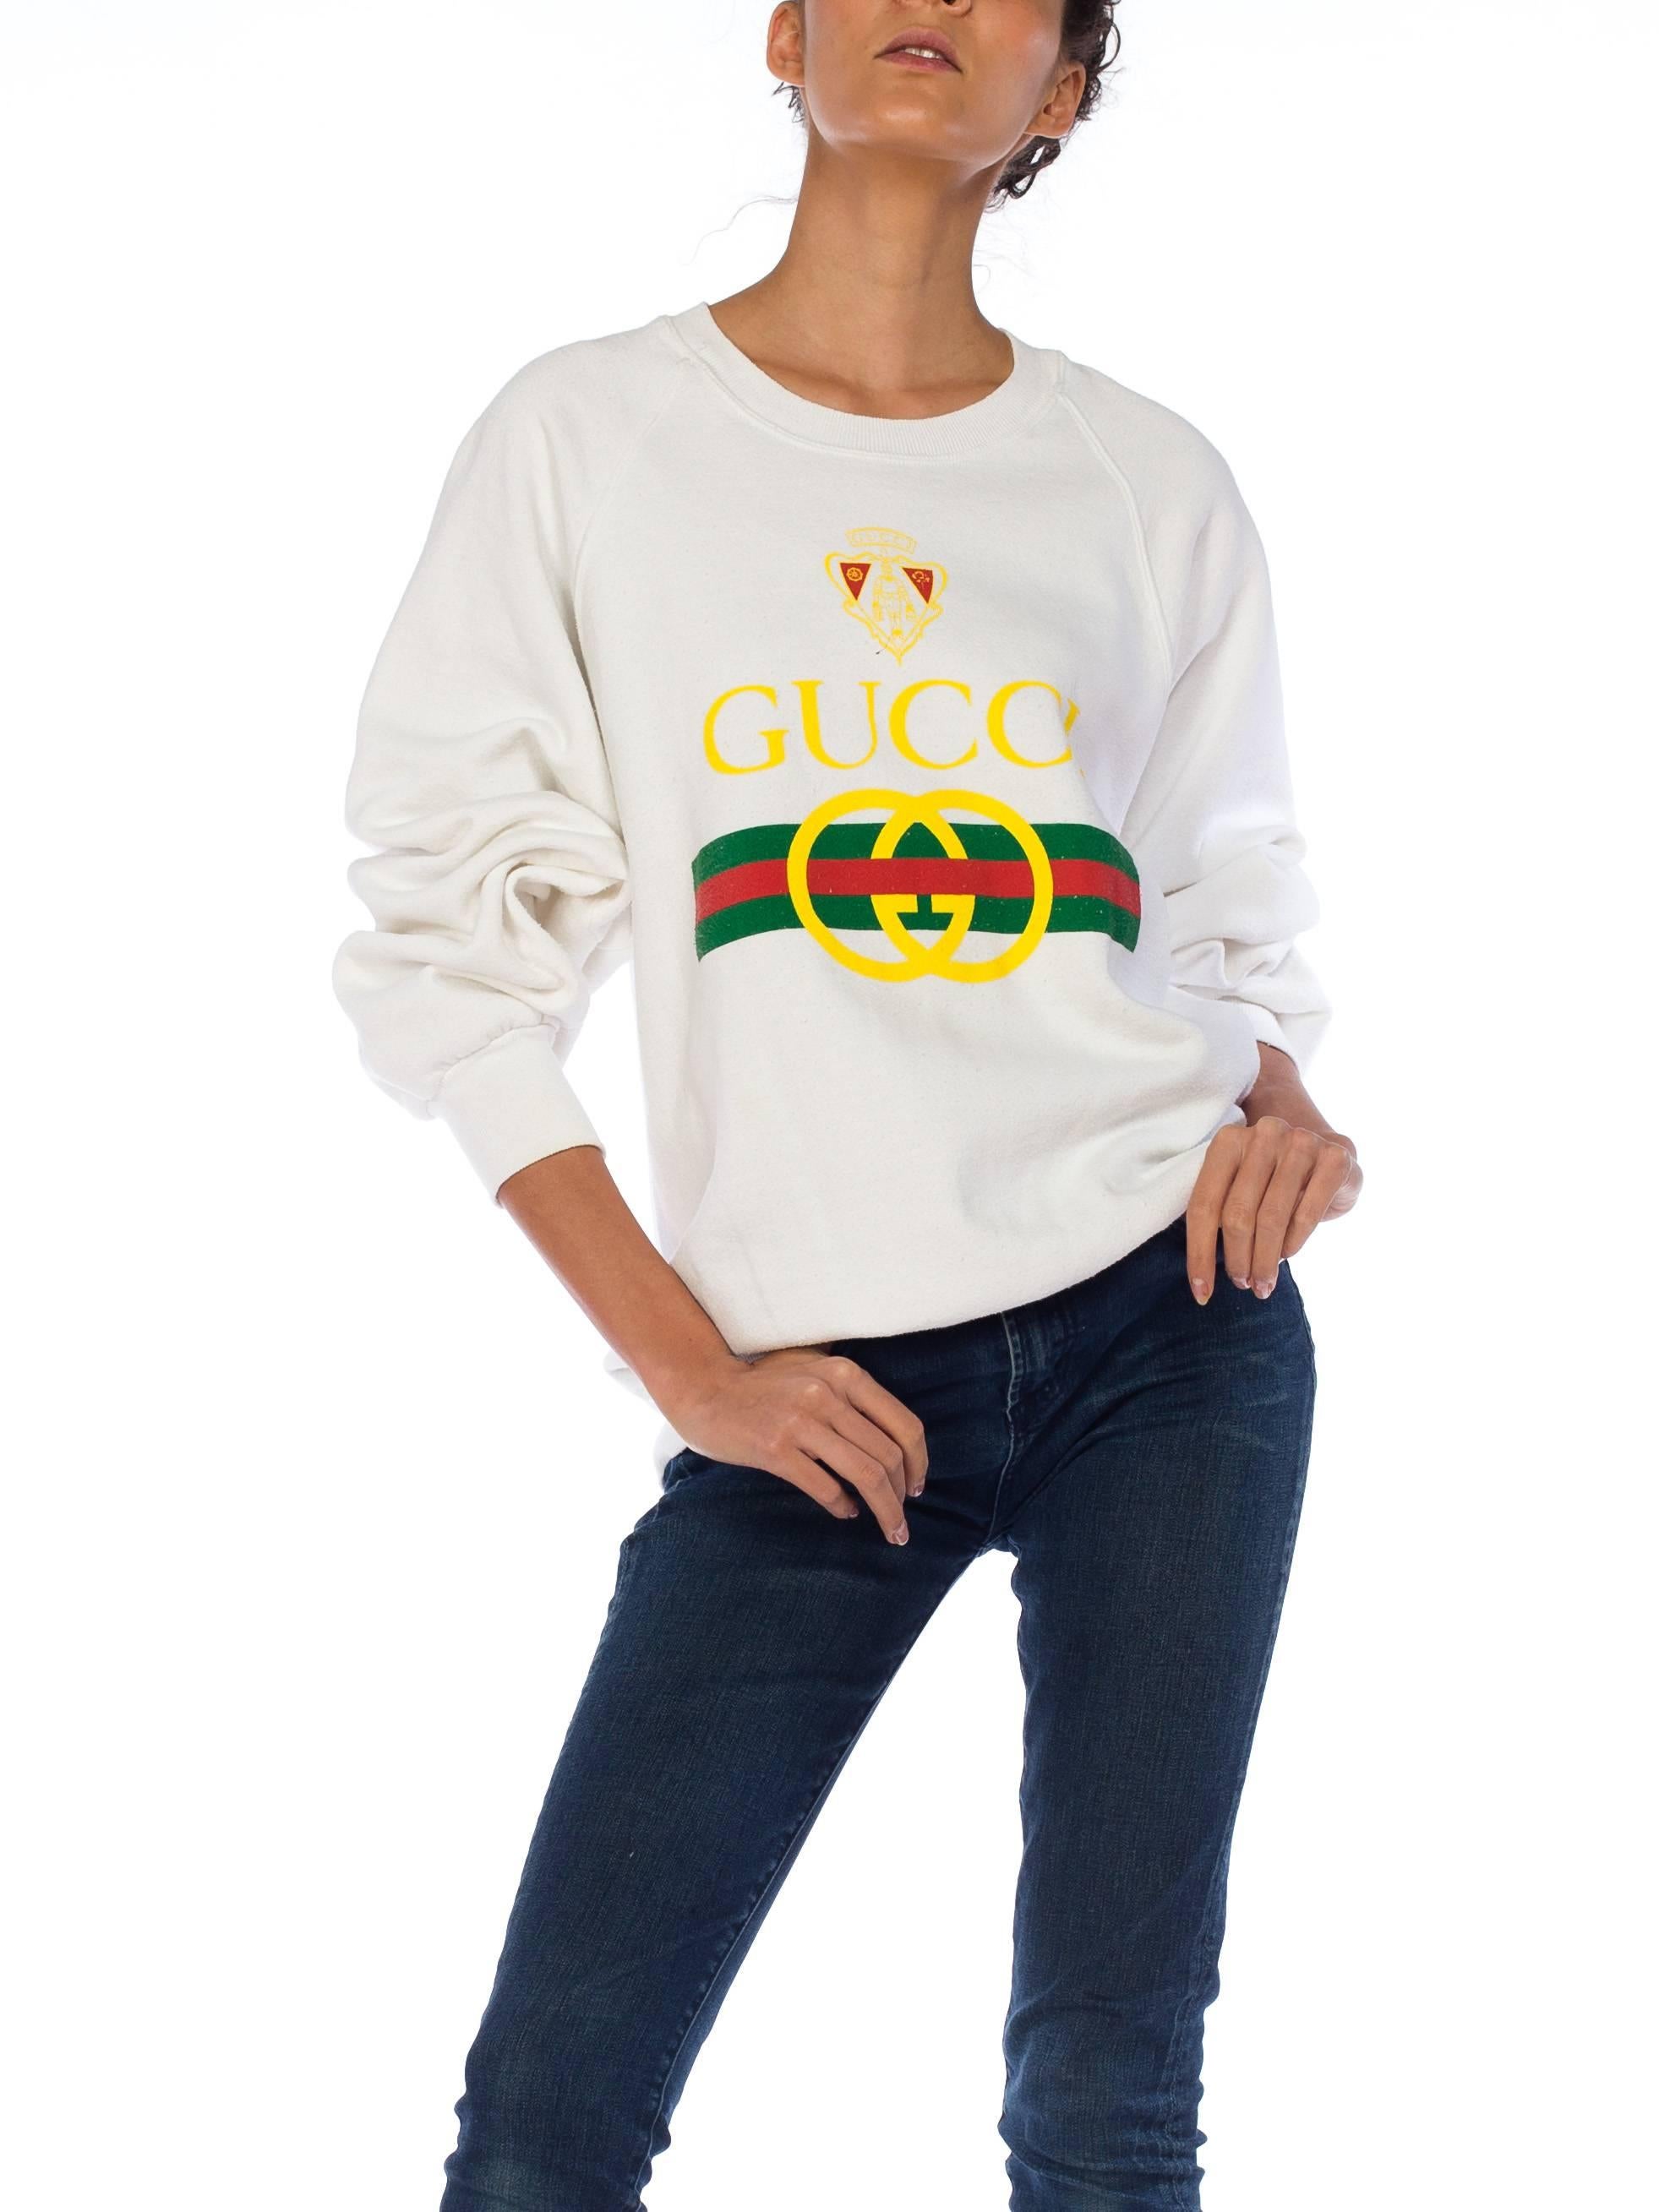 Gucci Bootleg 1980s Sweatshirt In Excellent Condition In New York, NY